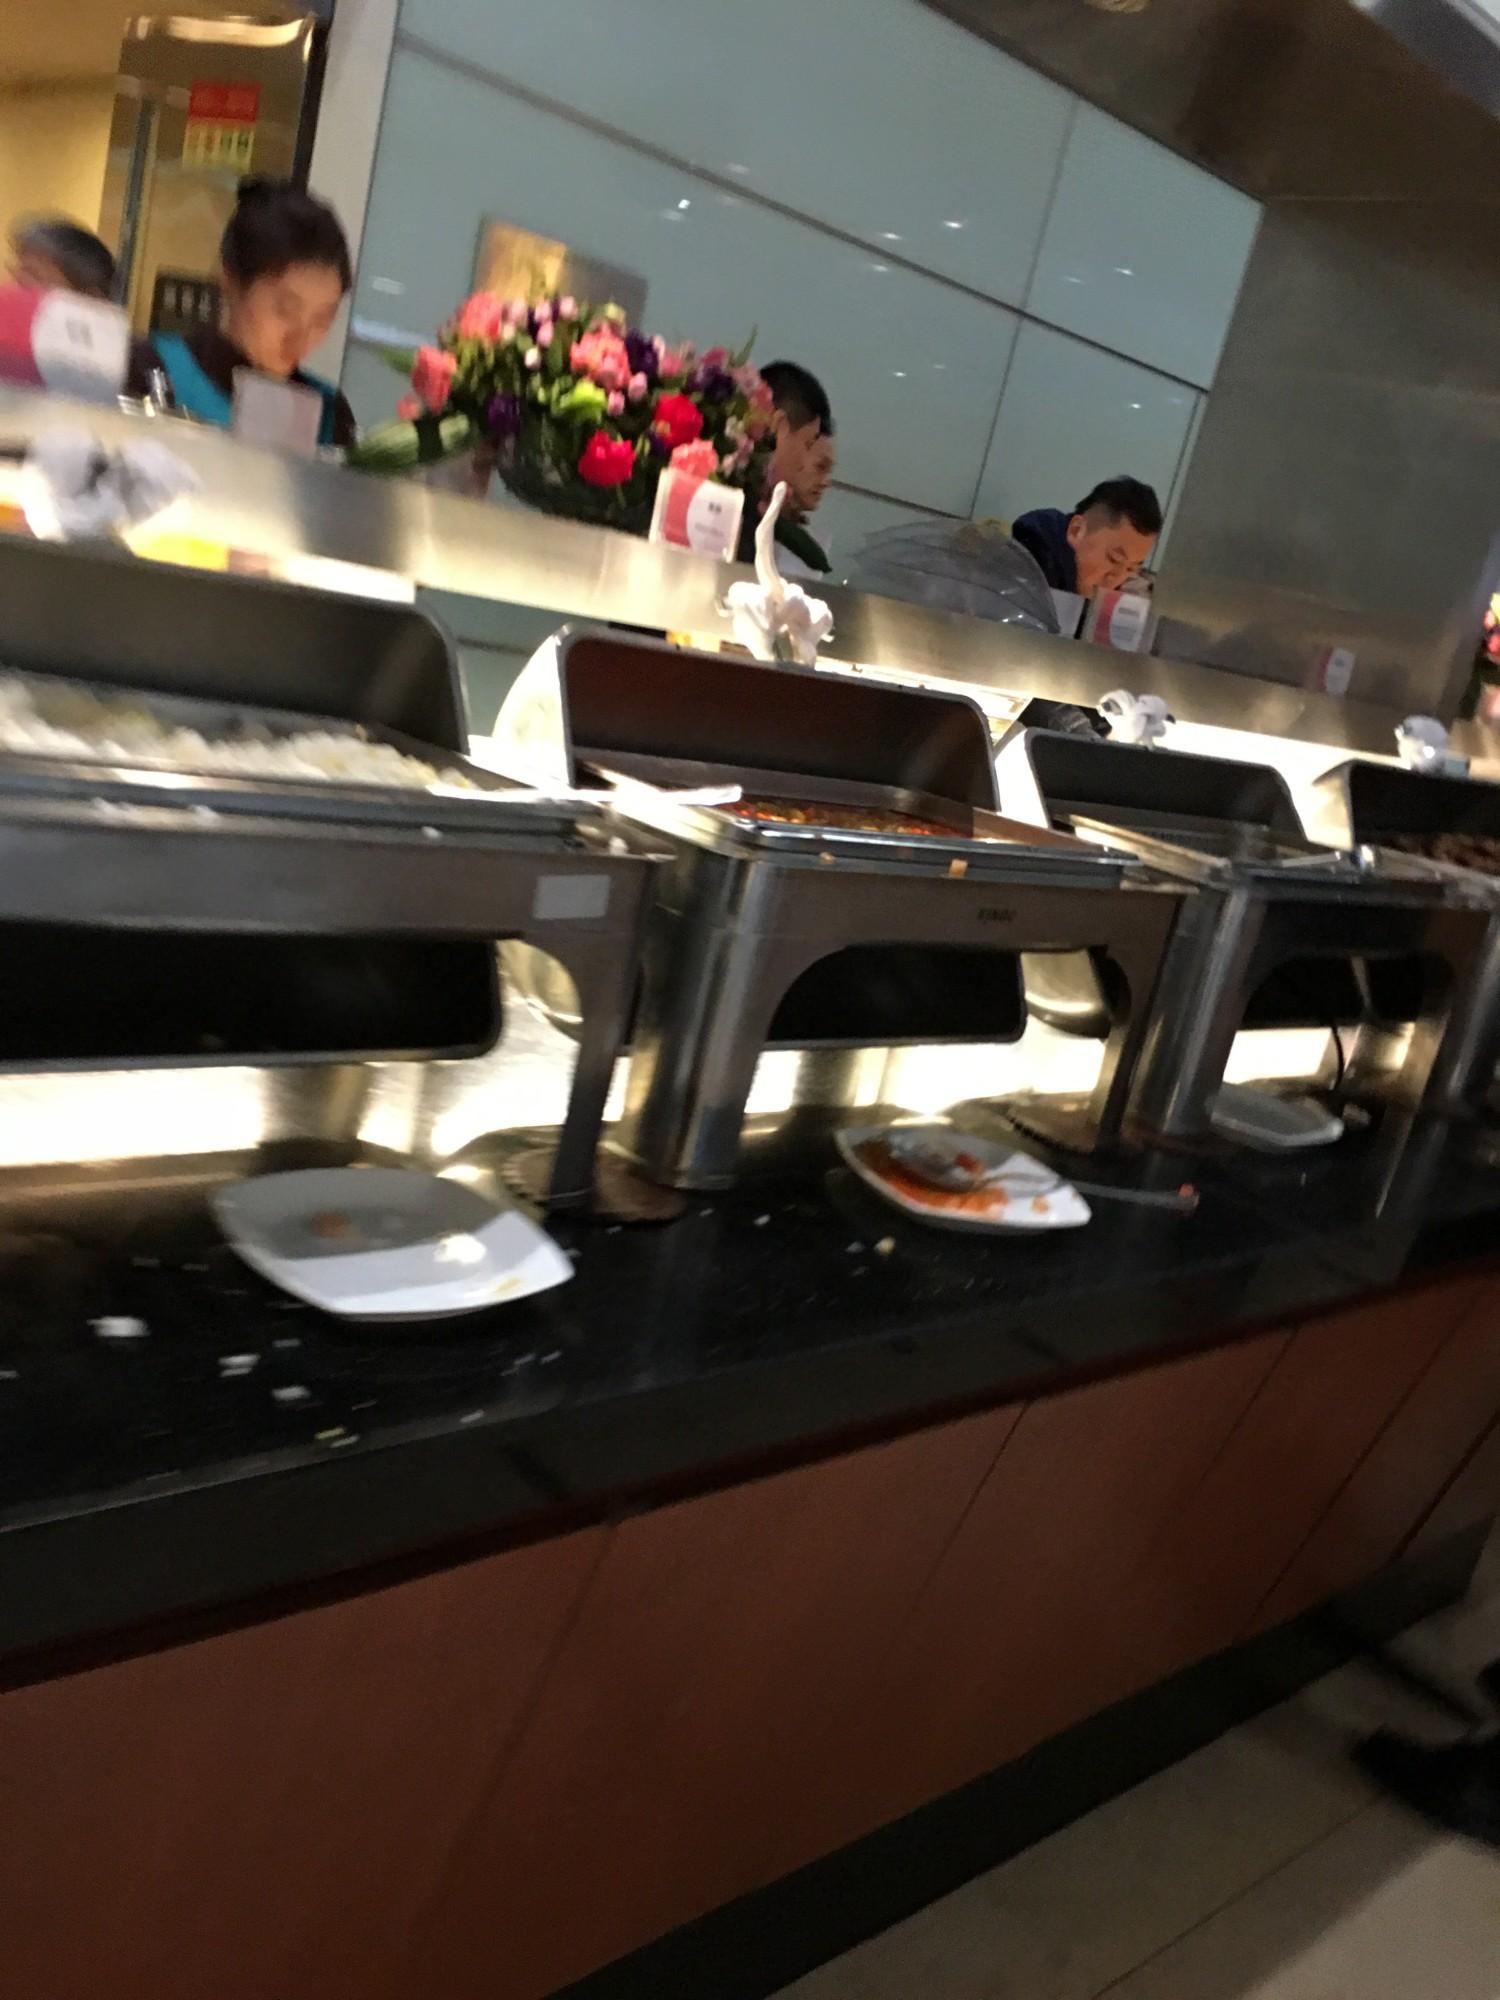 Air China Domestic Business Class Lounge image 2 of 6